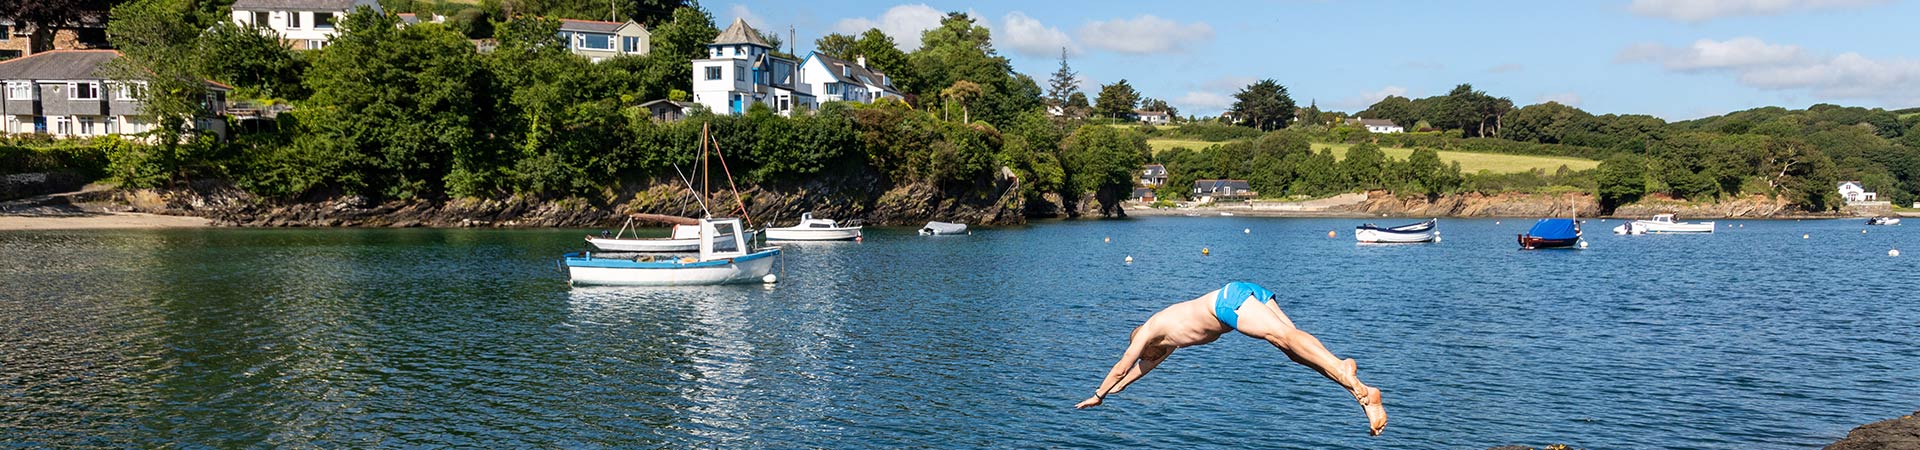 The best swimming beaches in Cornwall